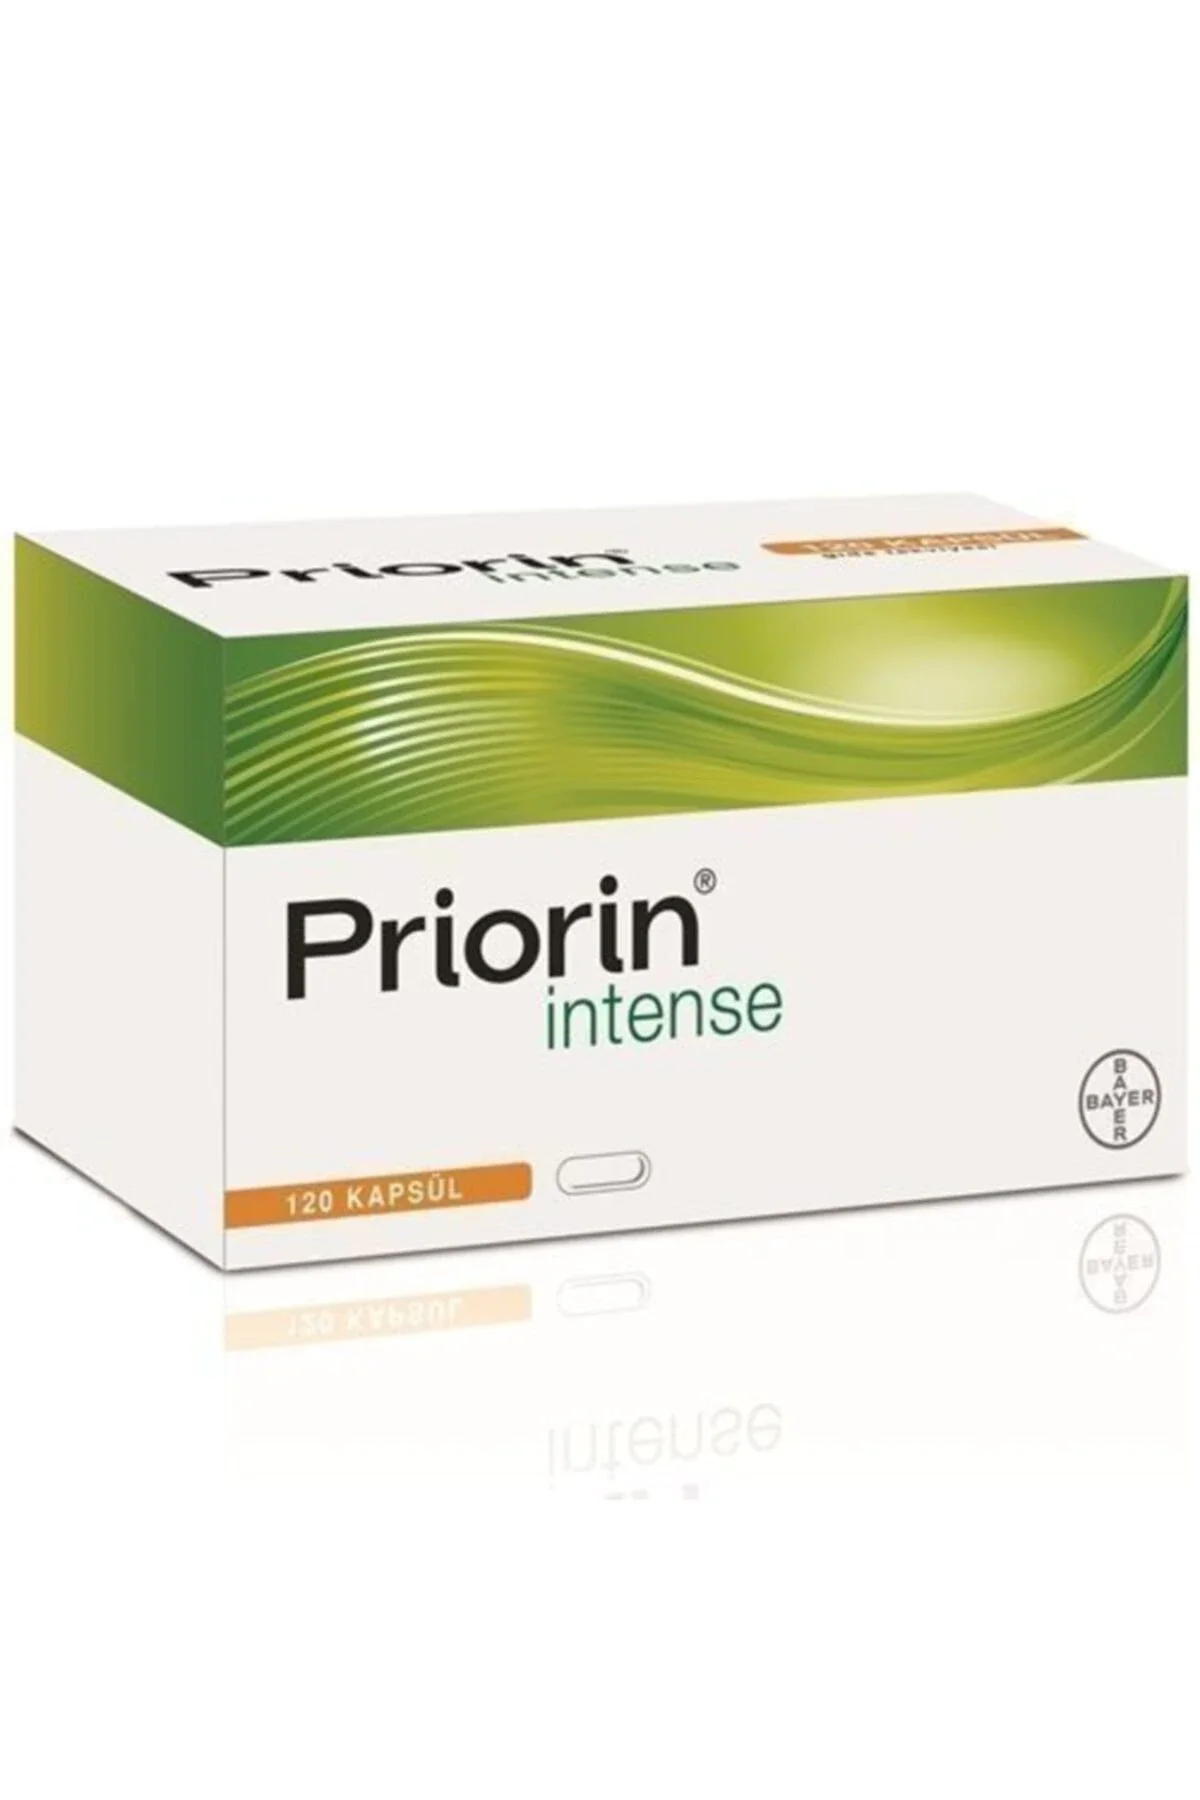 

Priorin Intense Capsules, 60 - 120 -180 Tablets Hair Regrowth and Loss Supplement Contains Calcium Biotin